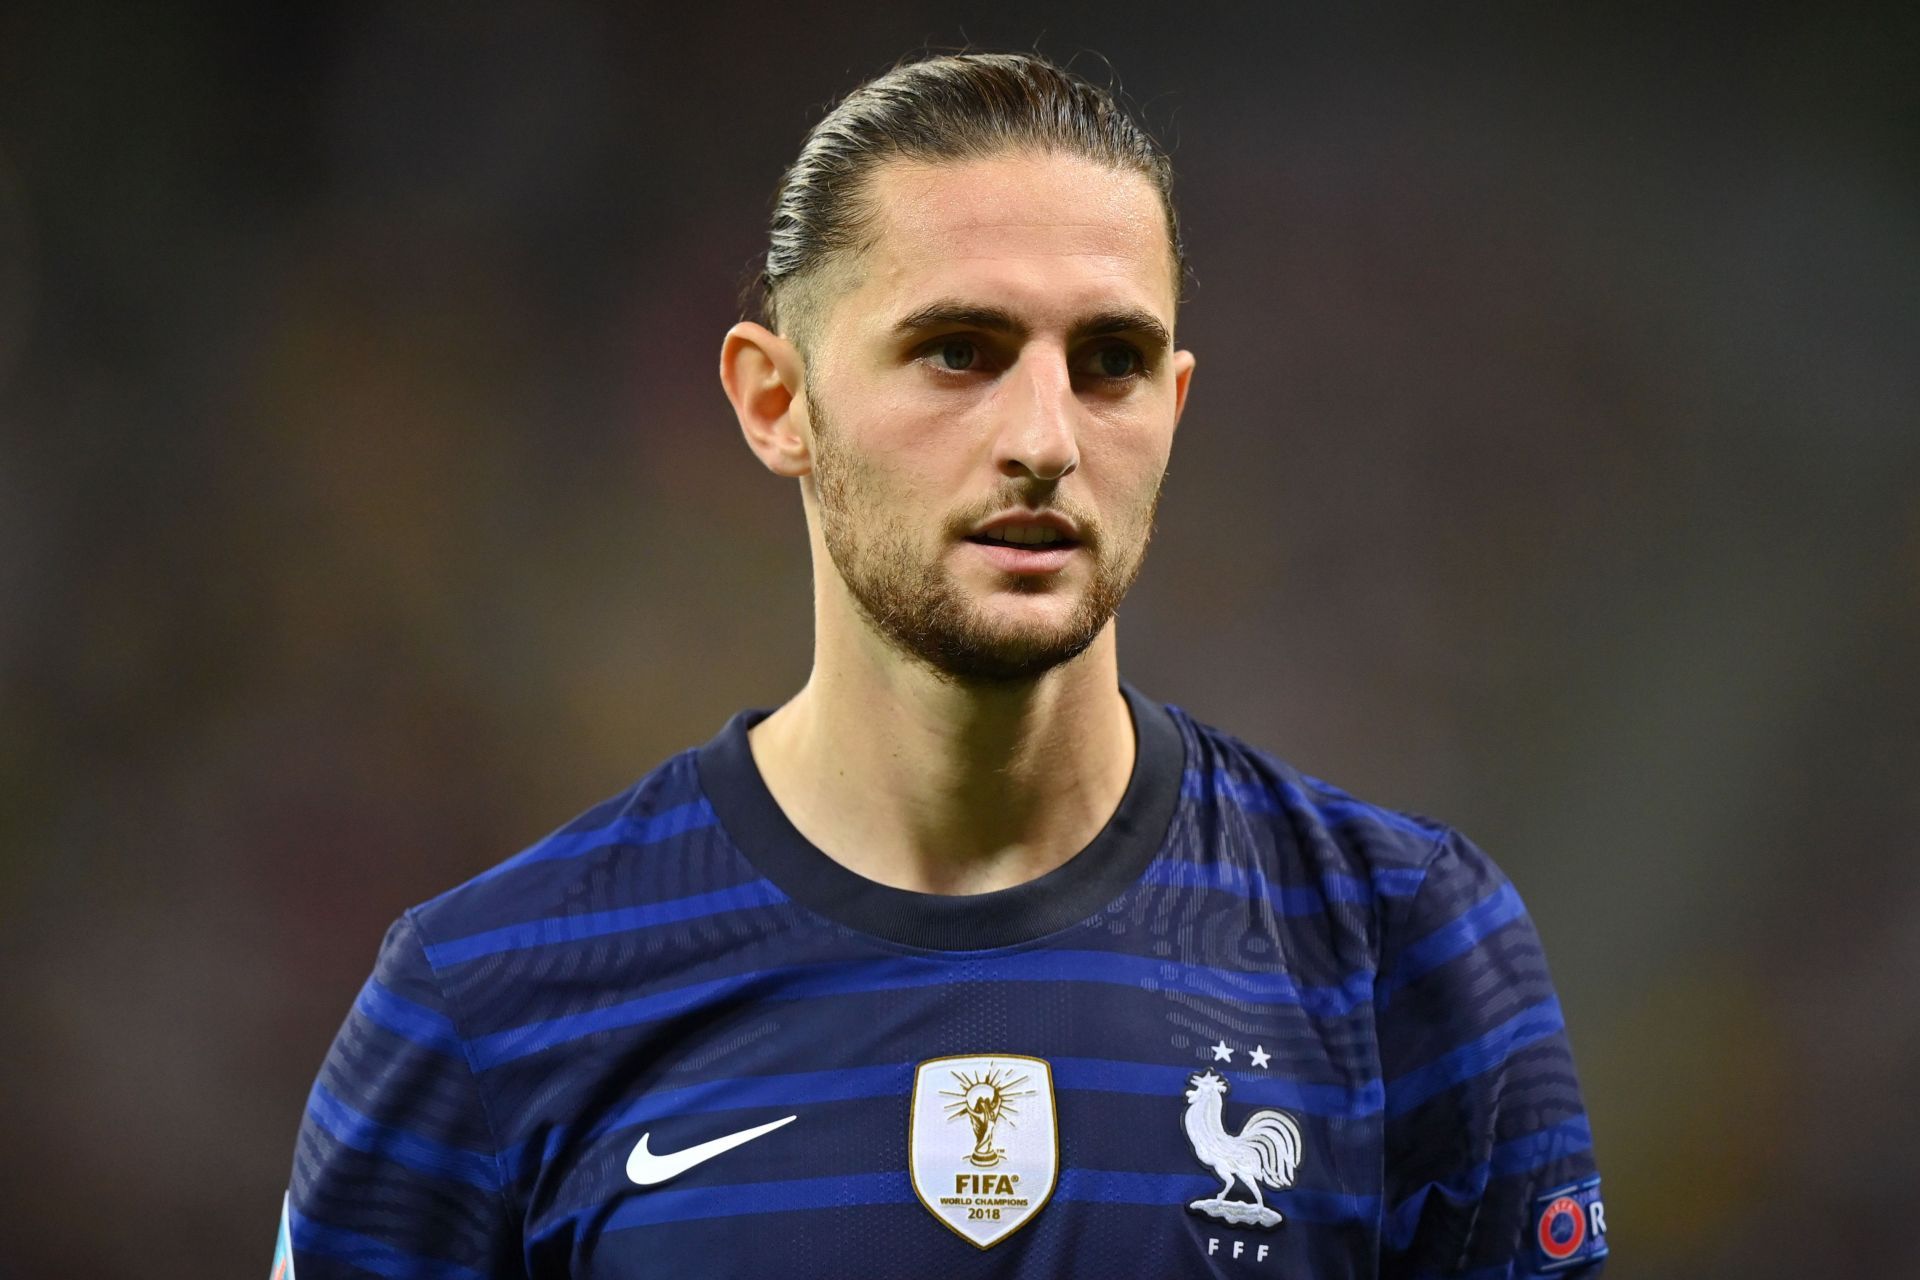 Real Madrid have been afforded an opportunity to sign Adrien Rabiot for &euro;15 million.